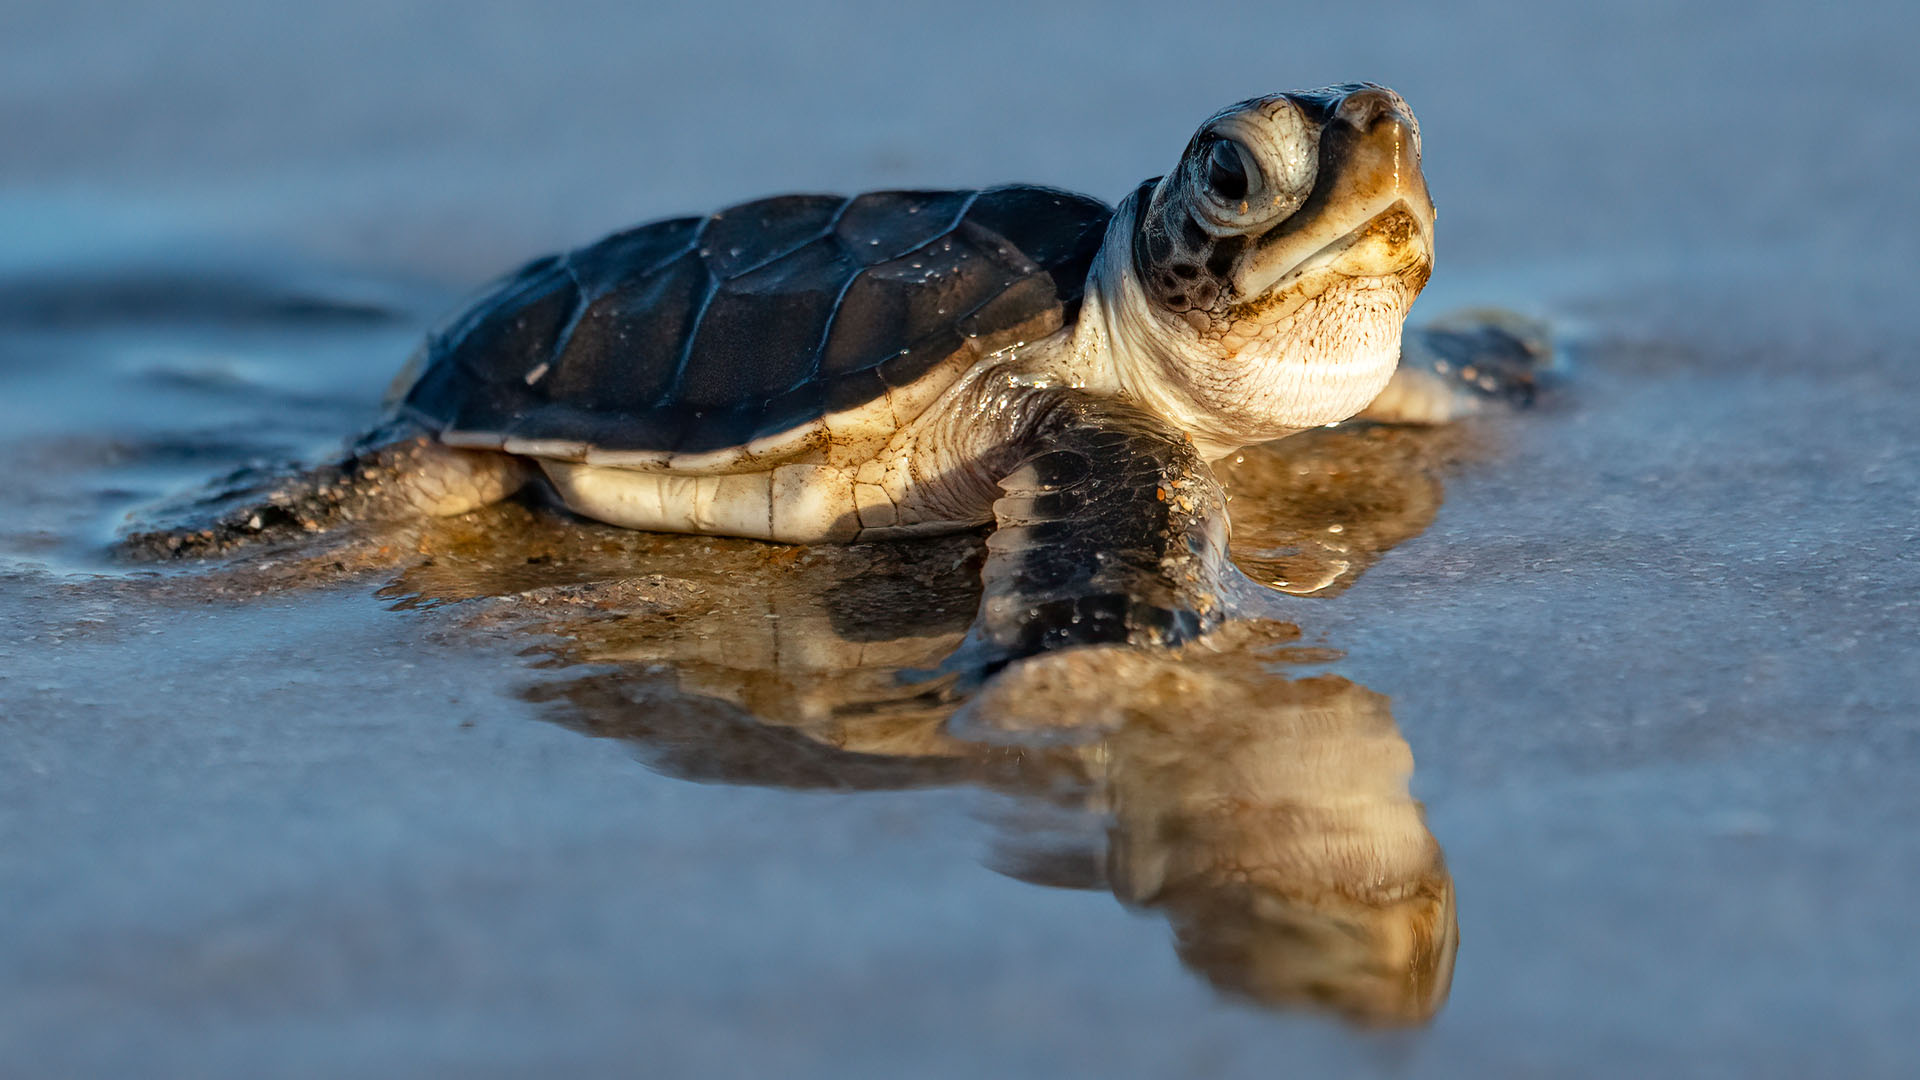 SONY A7IV Wildlife Photography – Photographing Sea Turtles in Florida with the A74